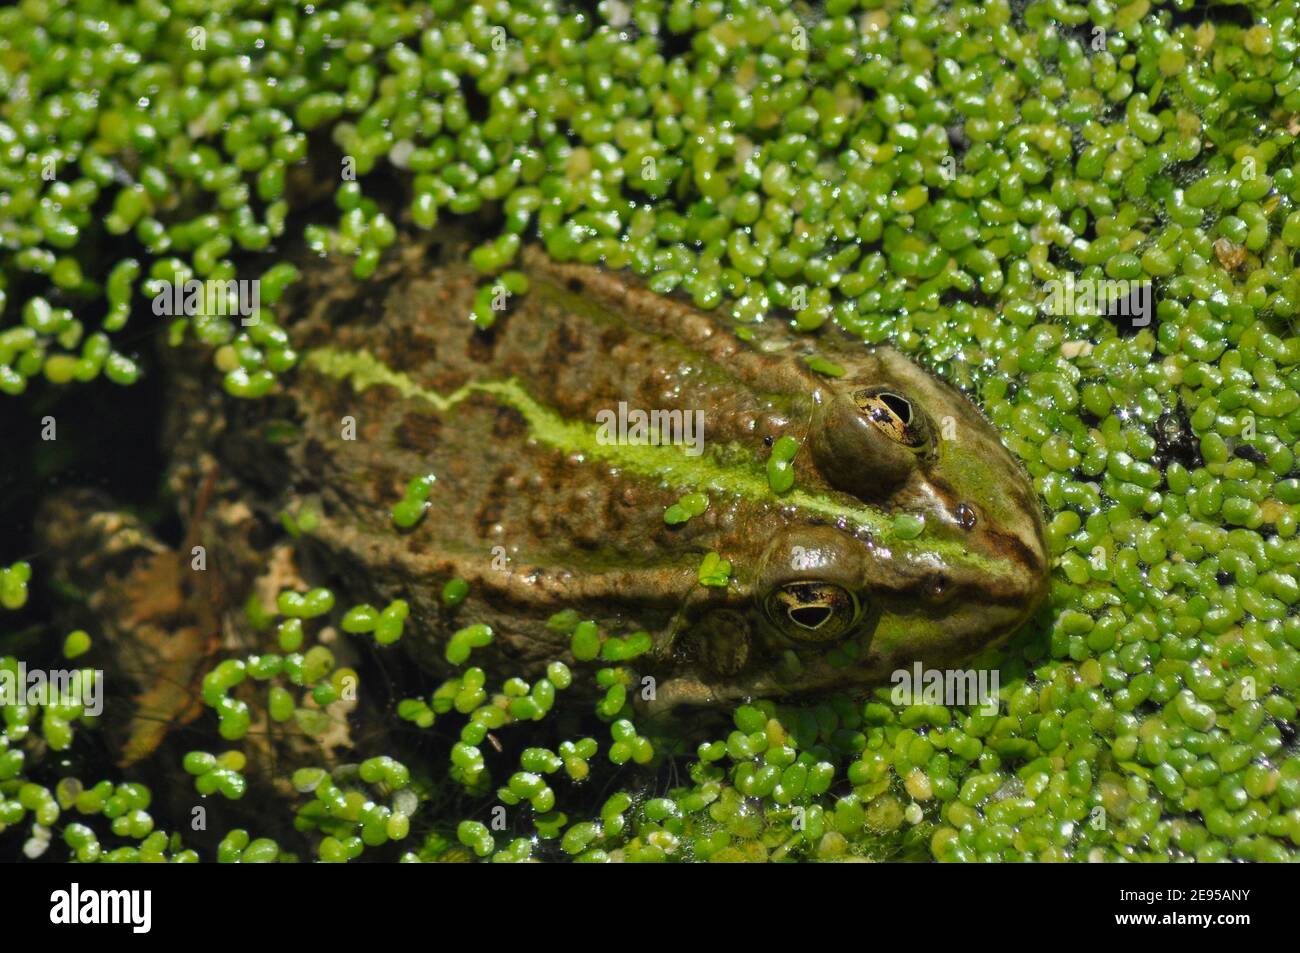 Natterjack Toad, Epidalea calamita,with distinctive marking surrounded by lesser duck weed. New Forest, Hampshire,UK Stock Photo